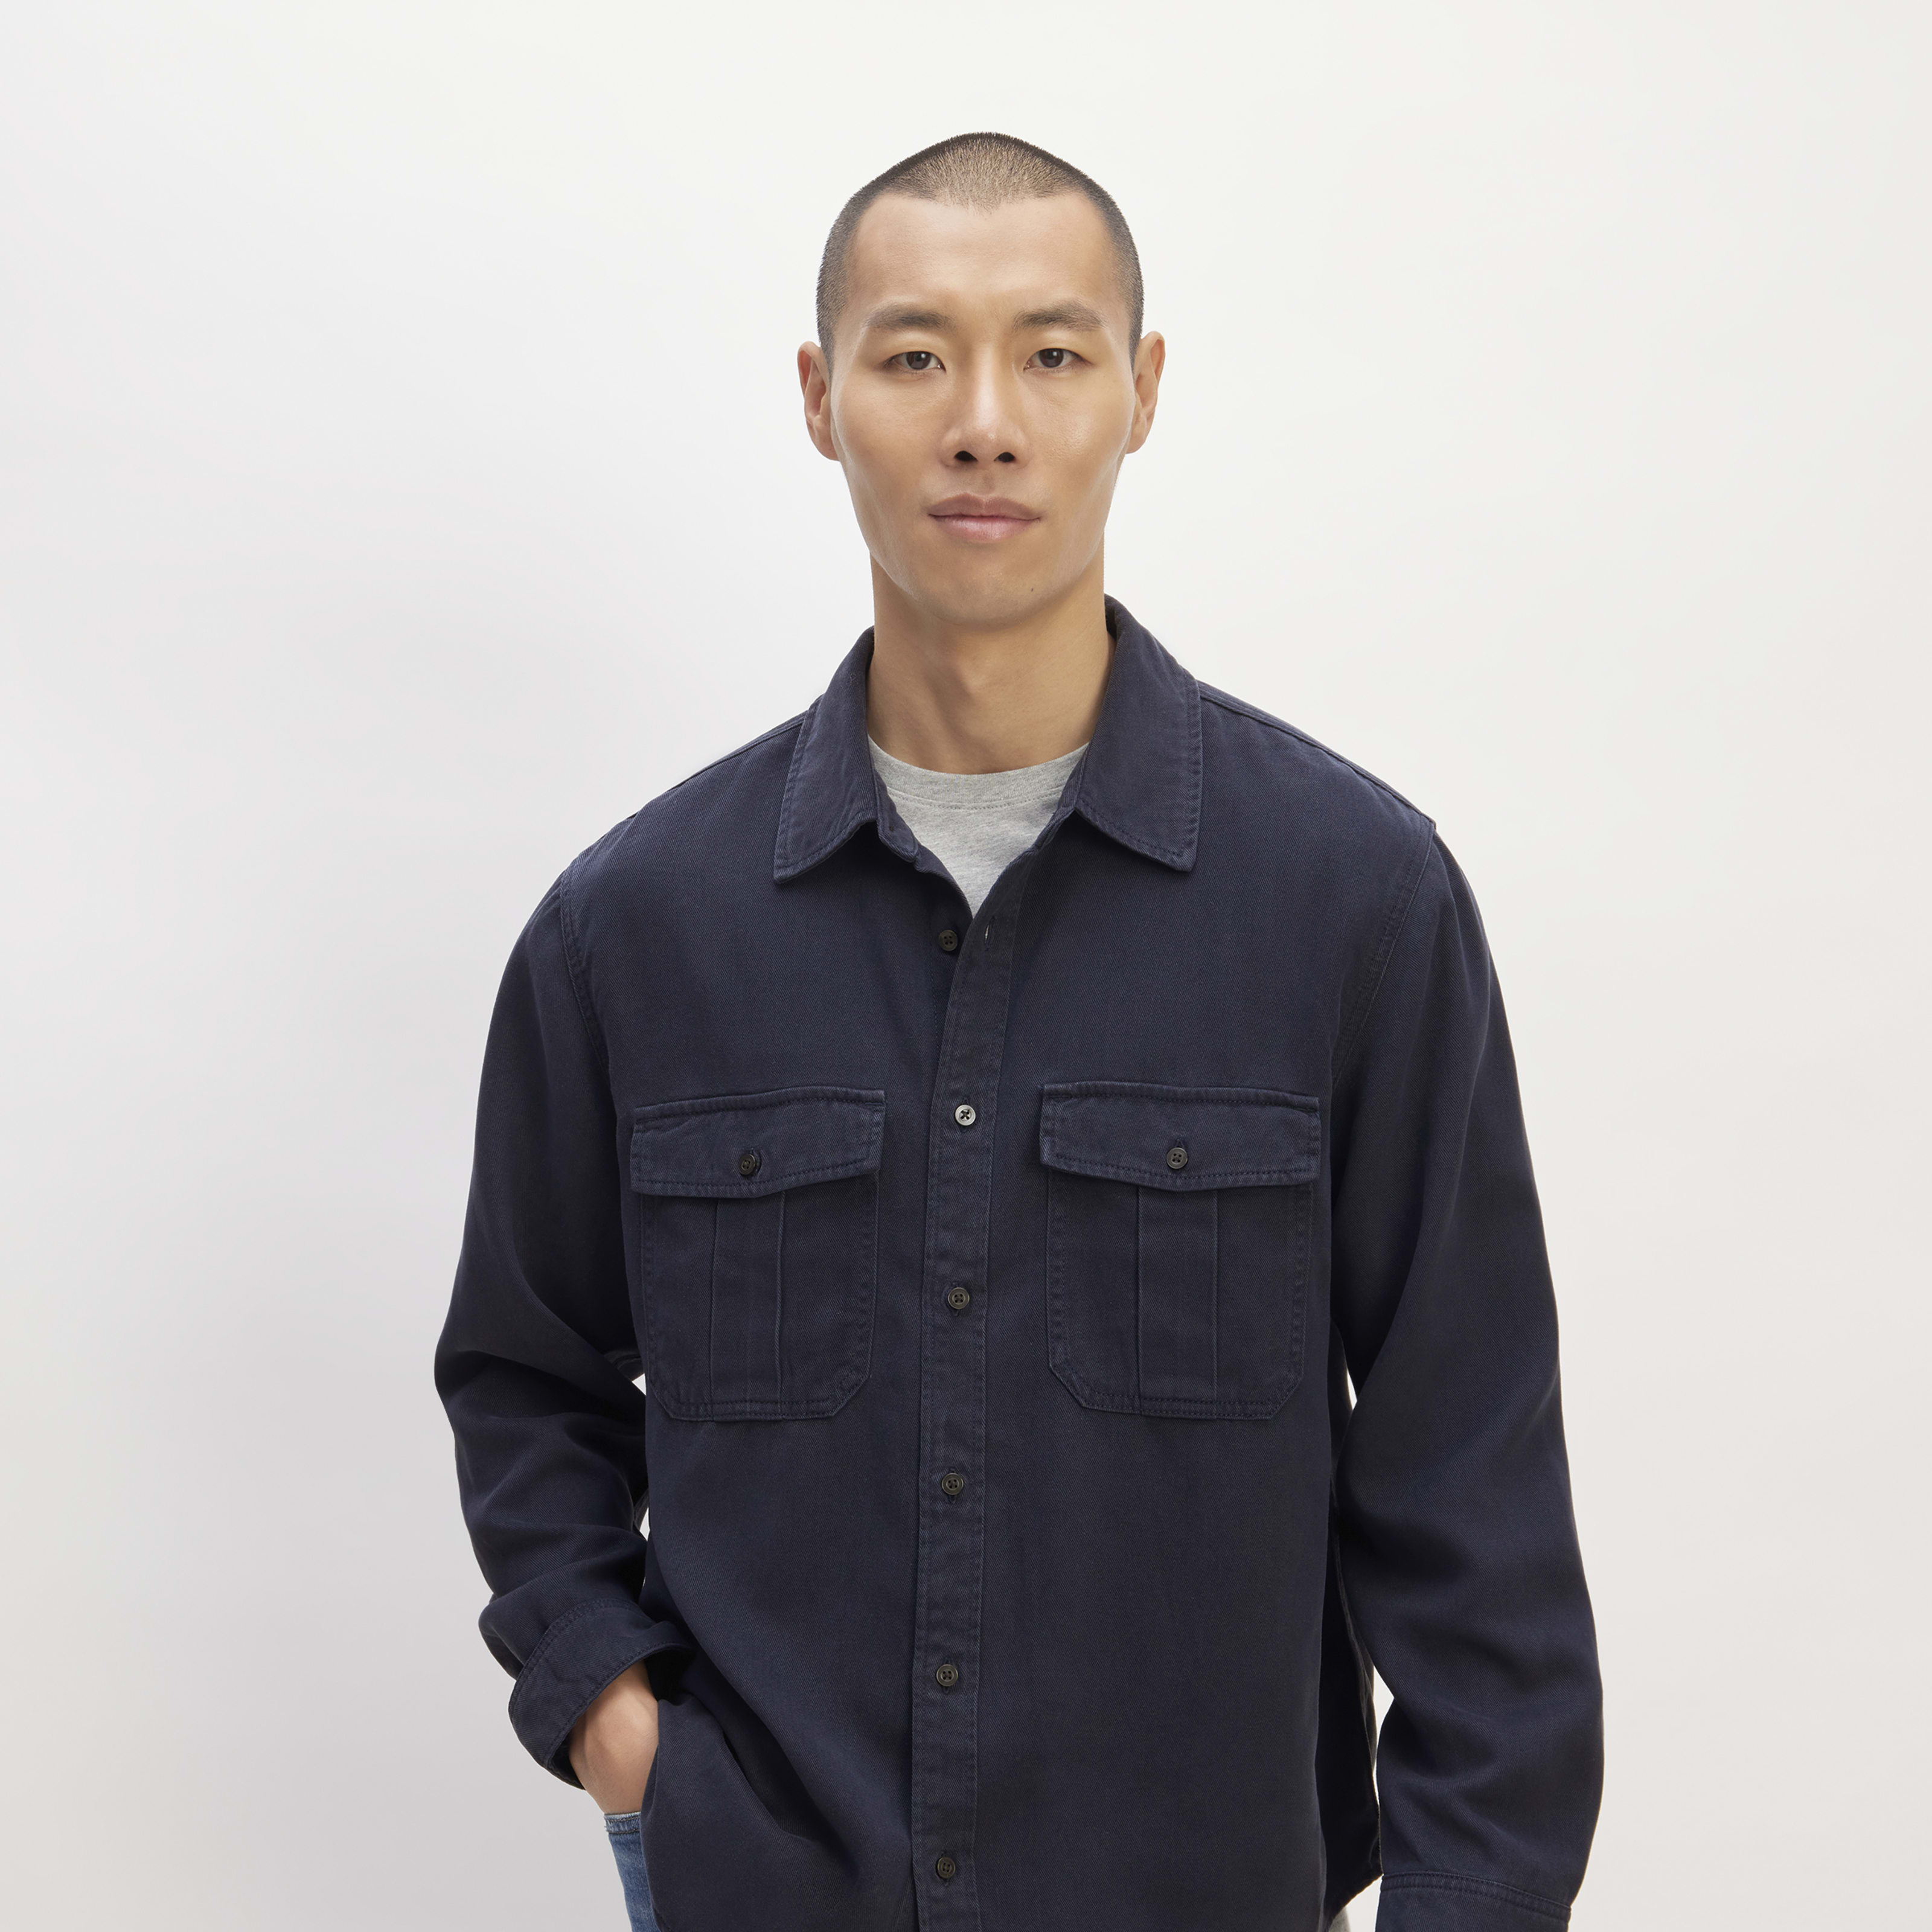 men's tencelâ„¢ utility overshirt sweater by everlane in navy, size xs